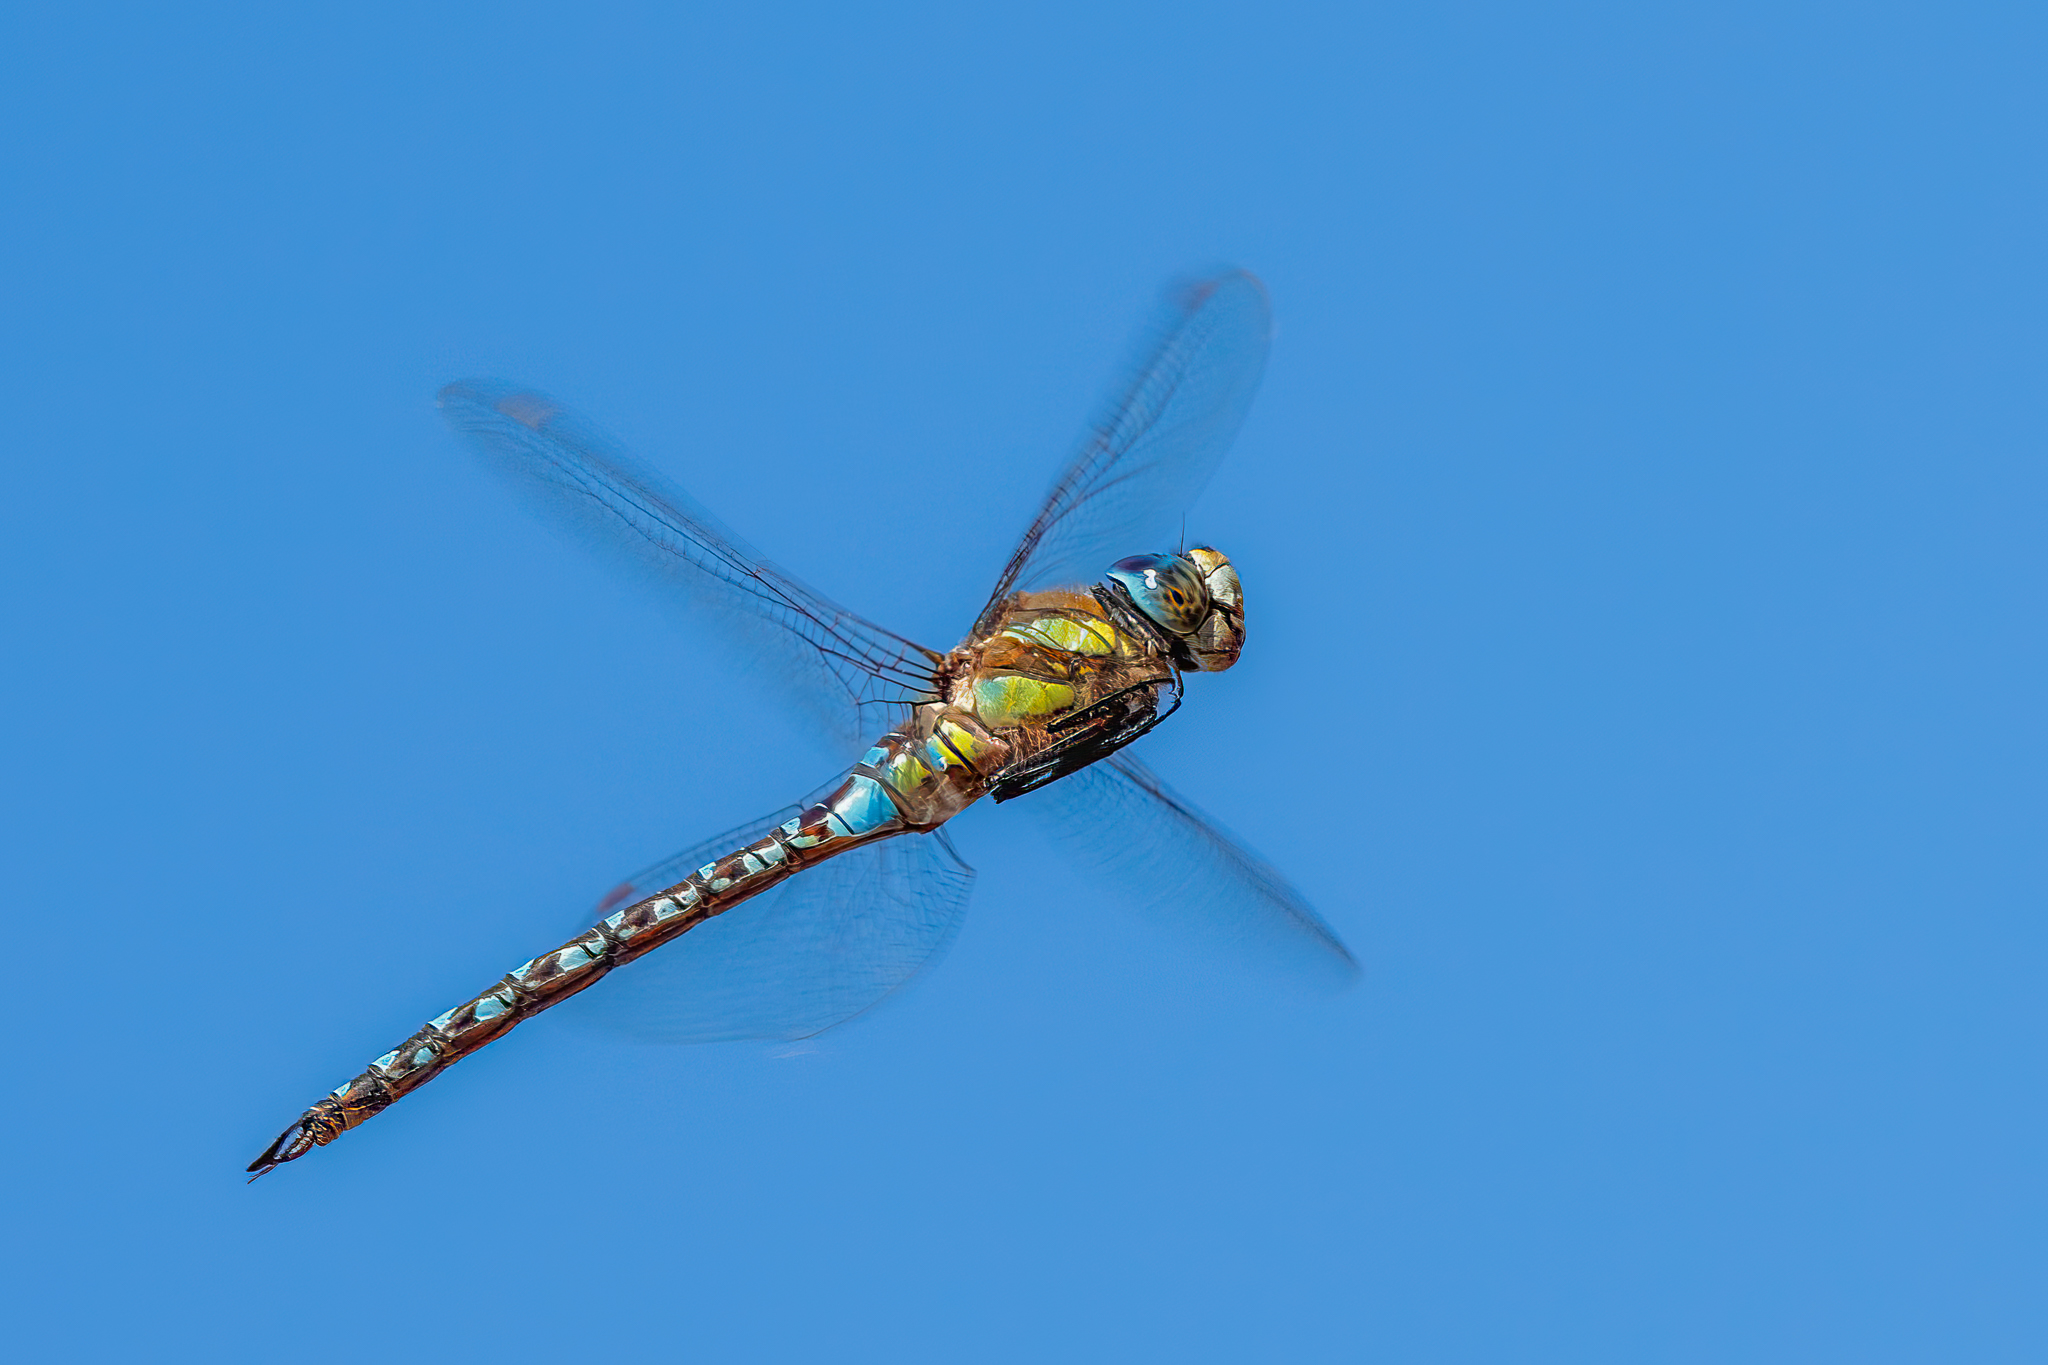 The flight of the dragonfly...